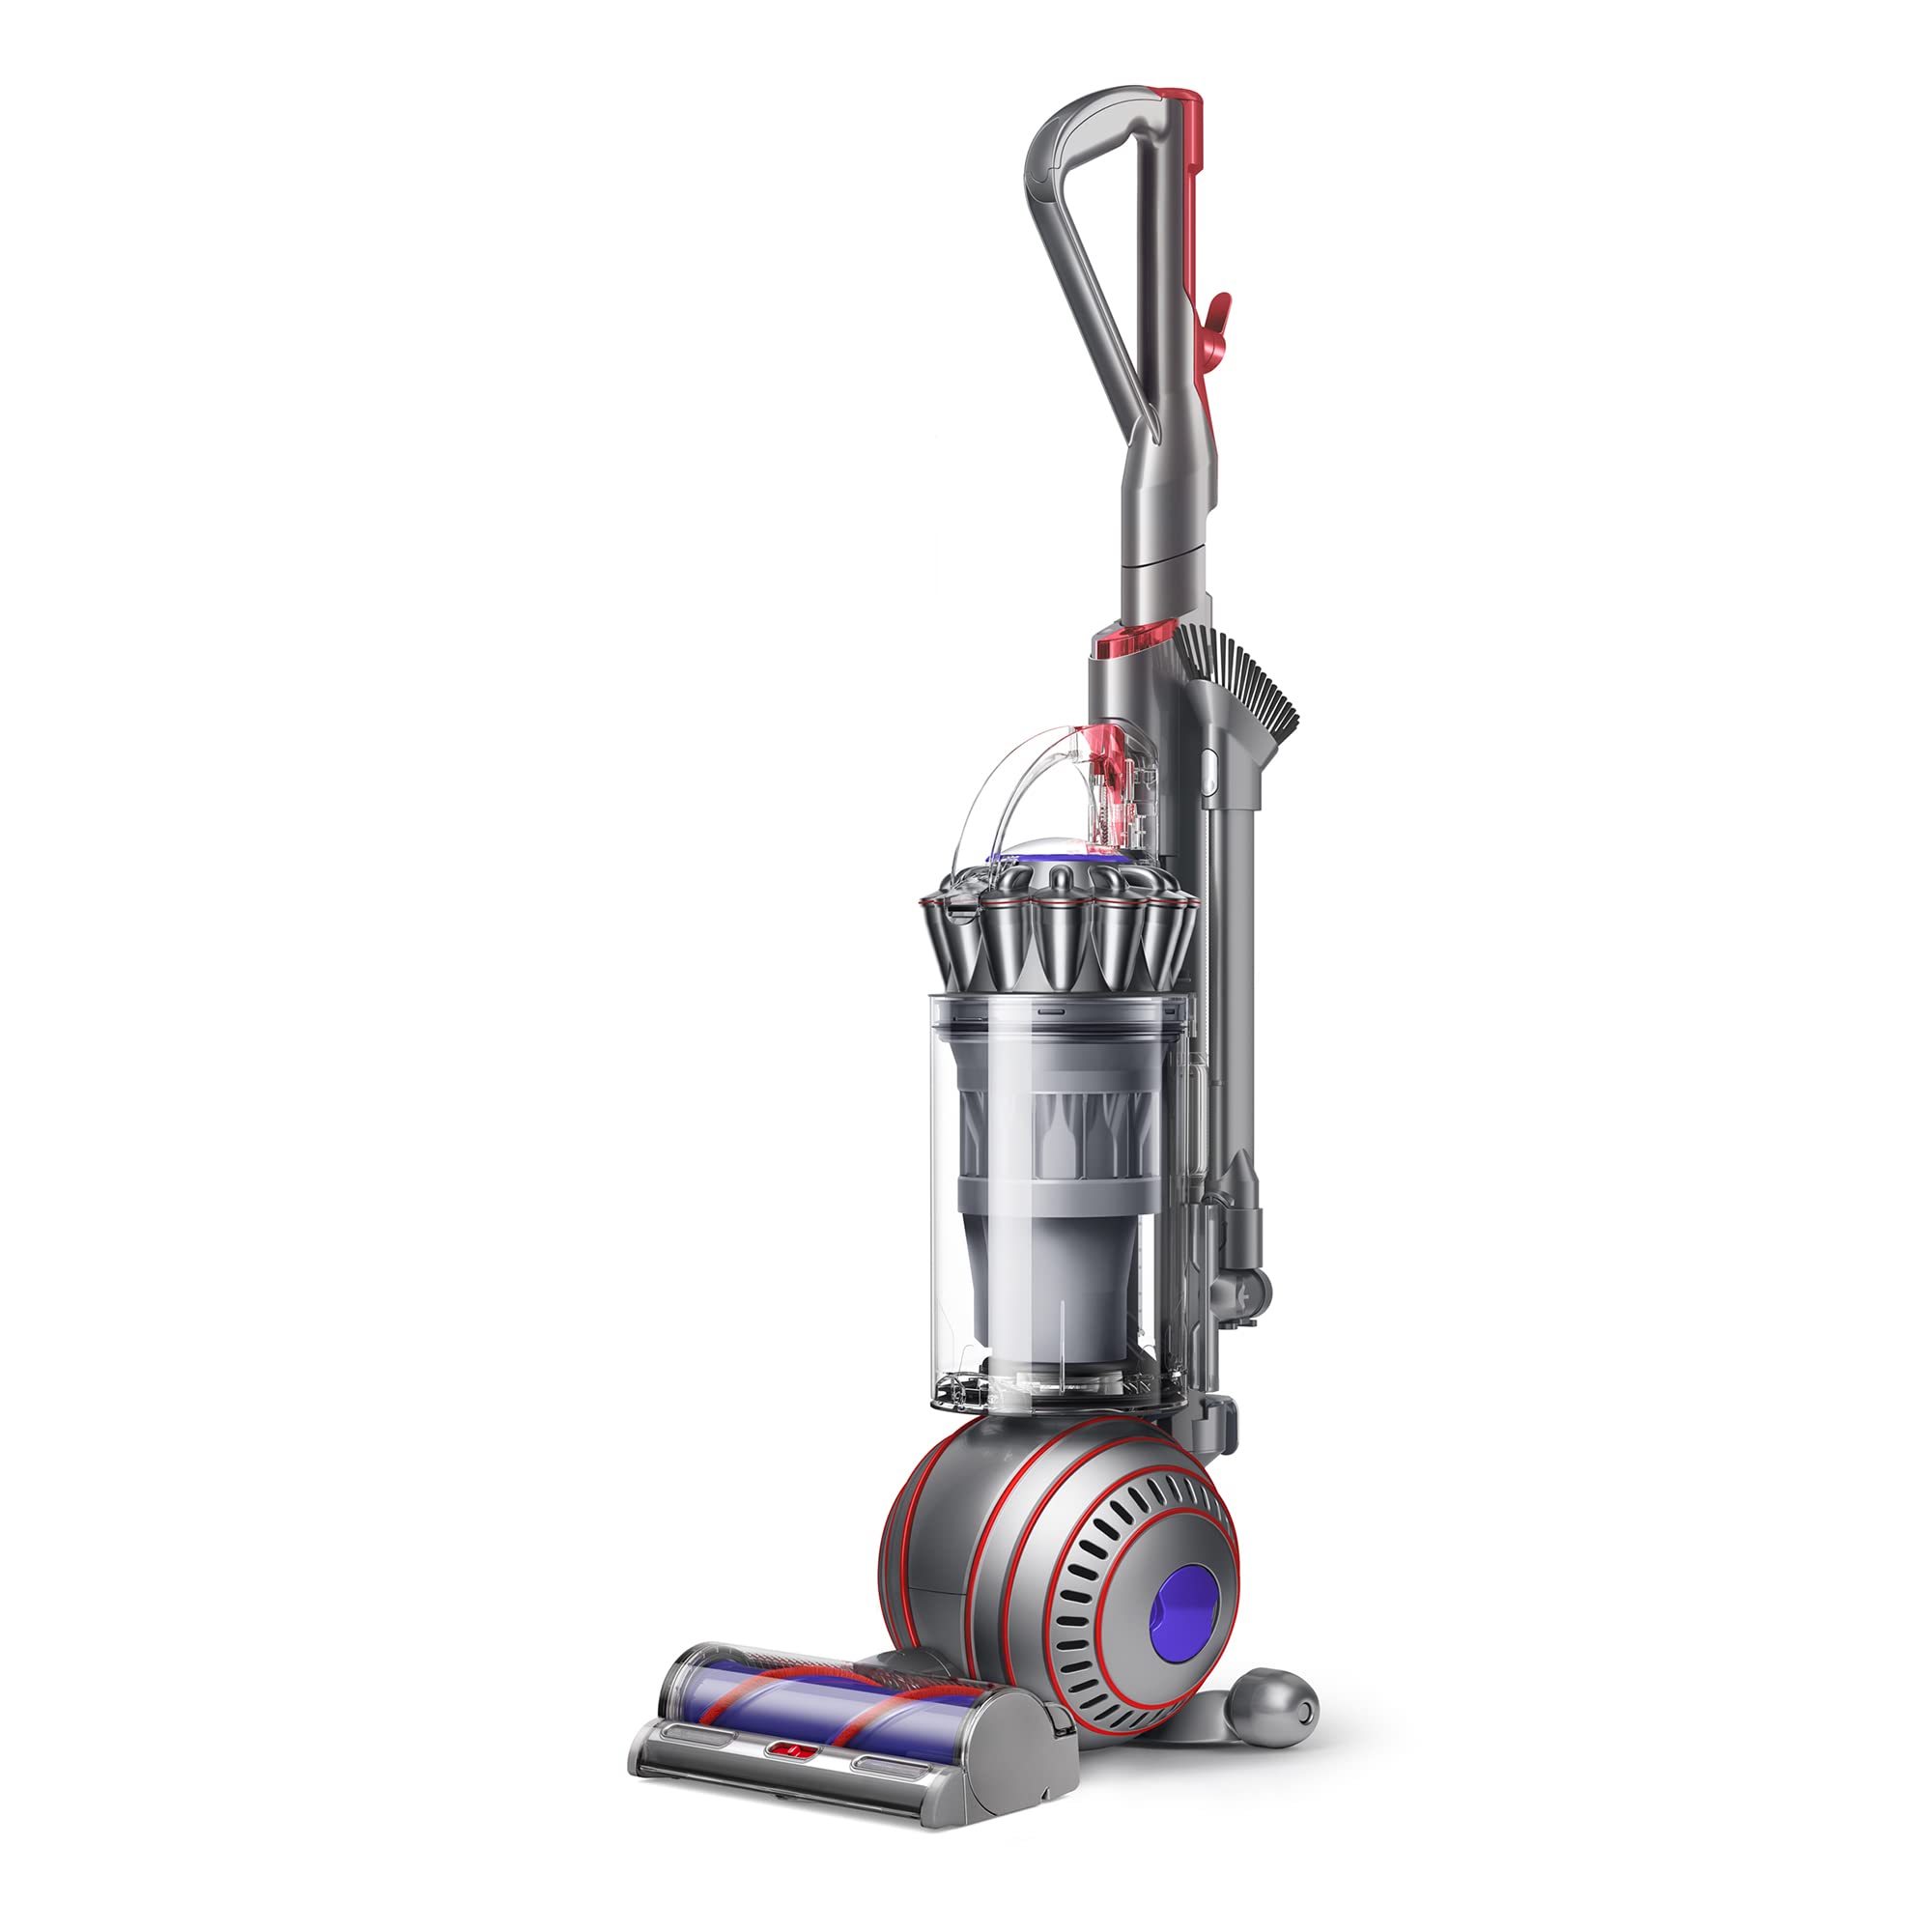 Dyson Ball Animal 3 Upright Vacuum Cleaner -25% $299.99 List Price: $399.99